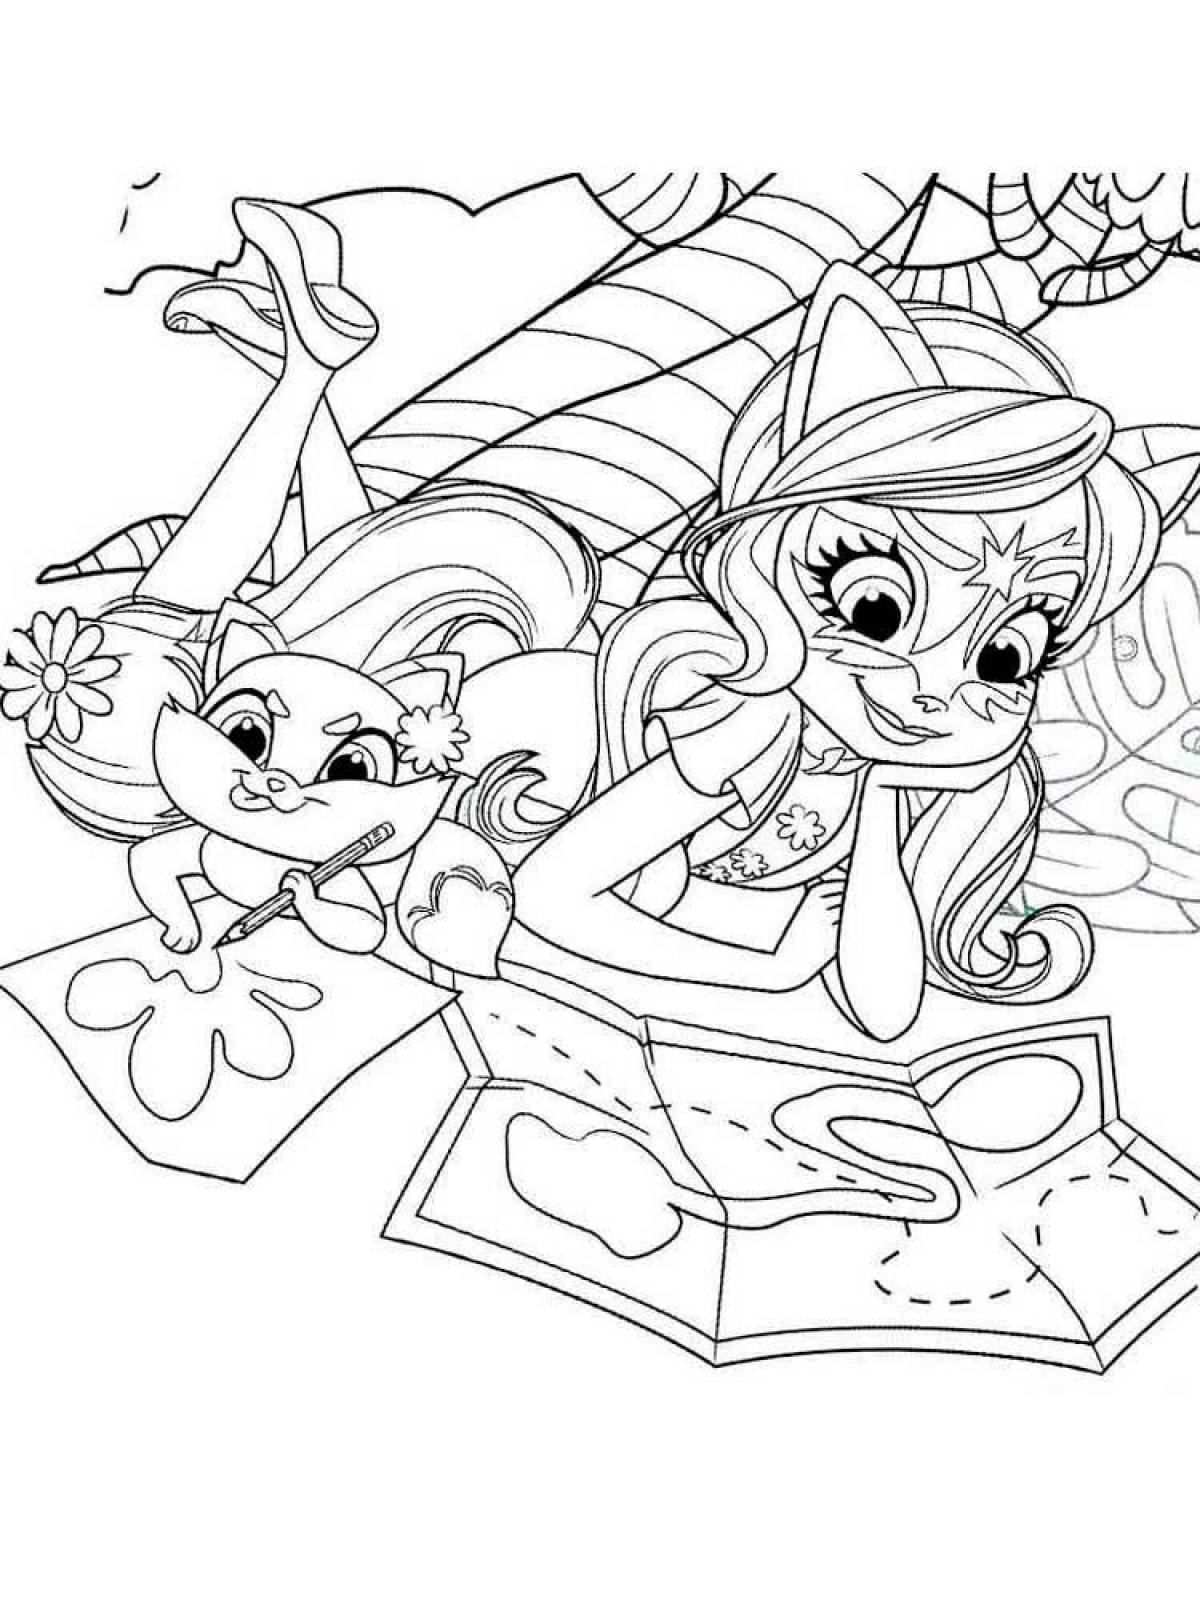 Cute enchantimals coloring pages for kids